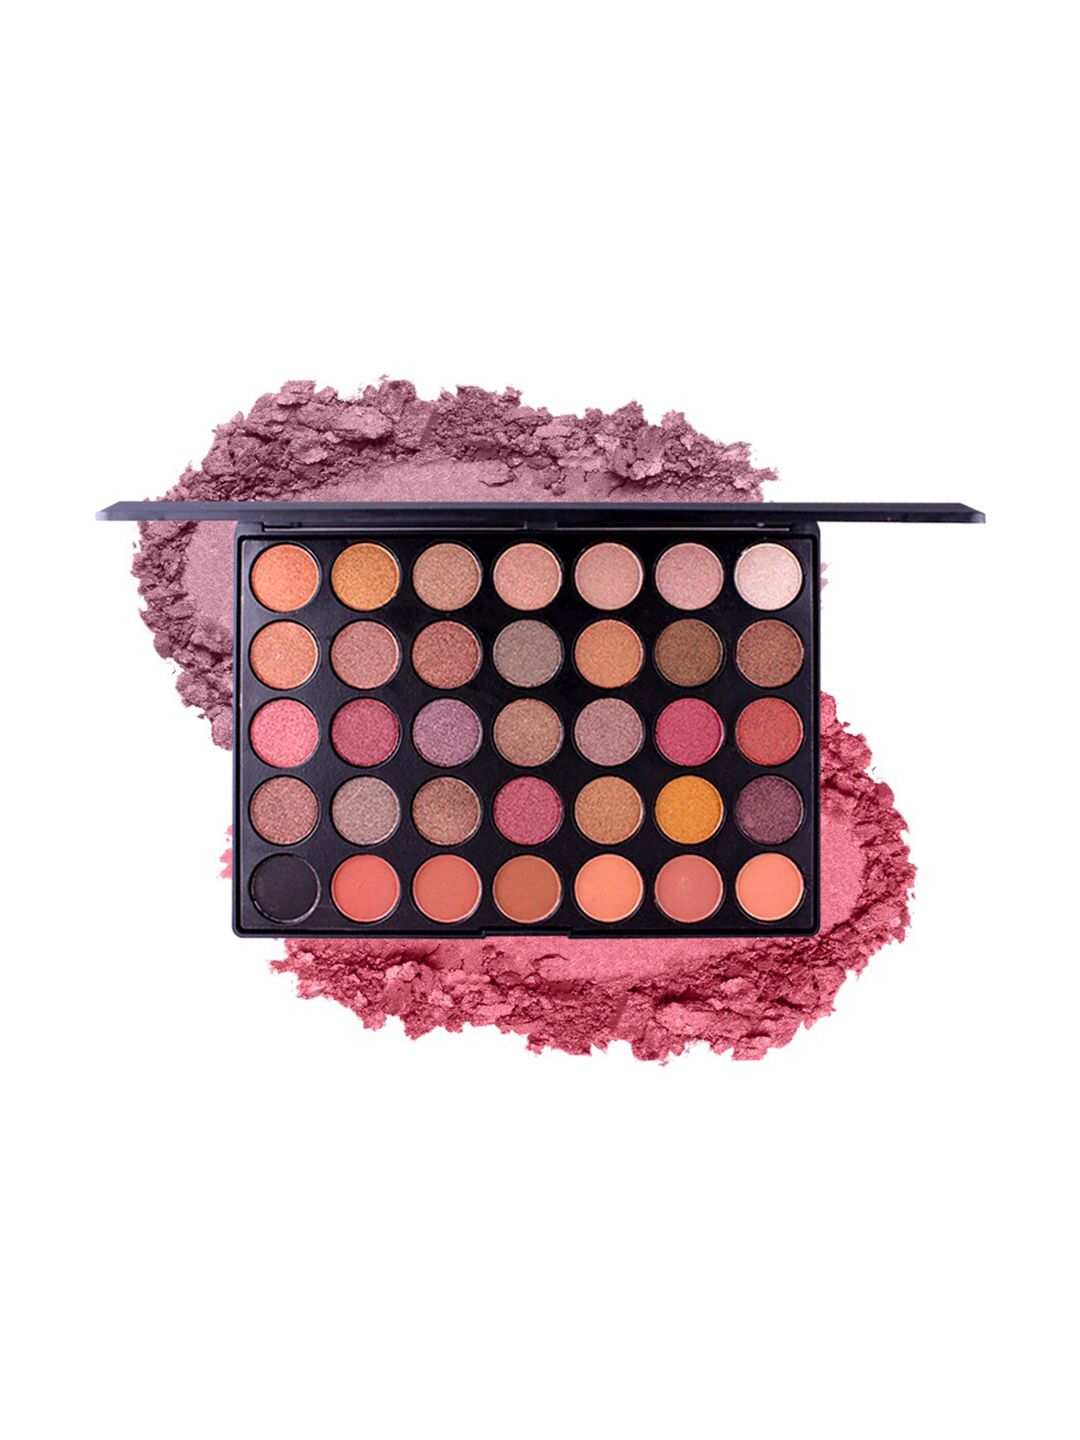 MISS ROSE 35 Color Matte Professional Eyeshadow Palette 7001-81 NY2 Price in India